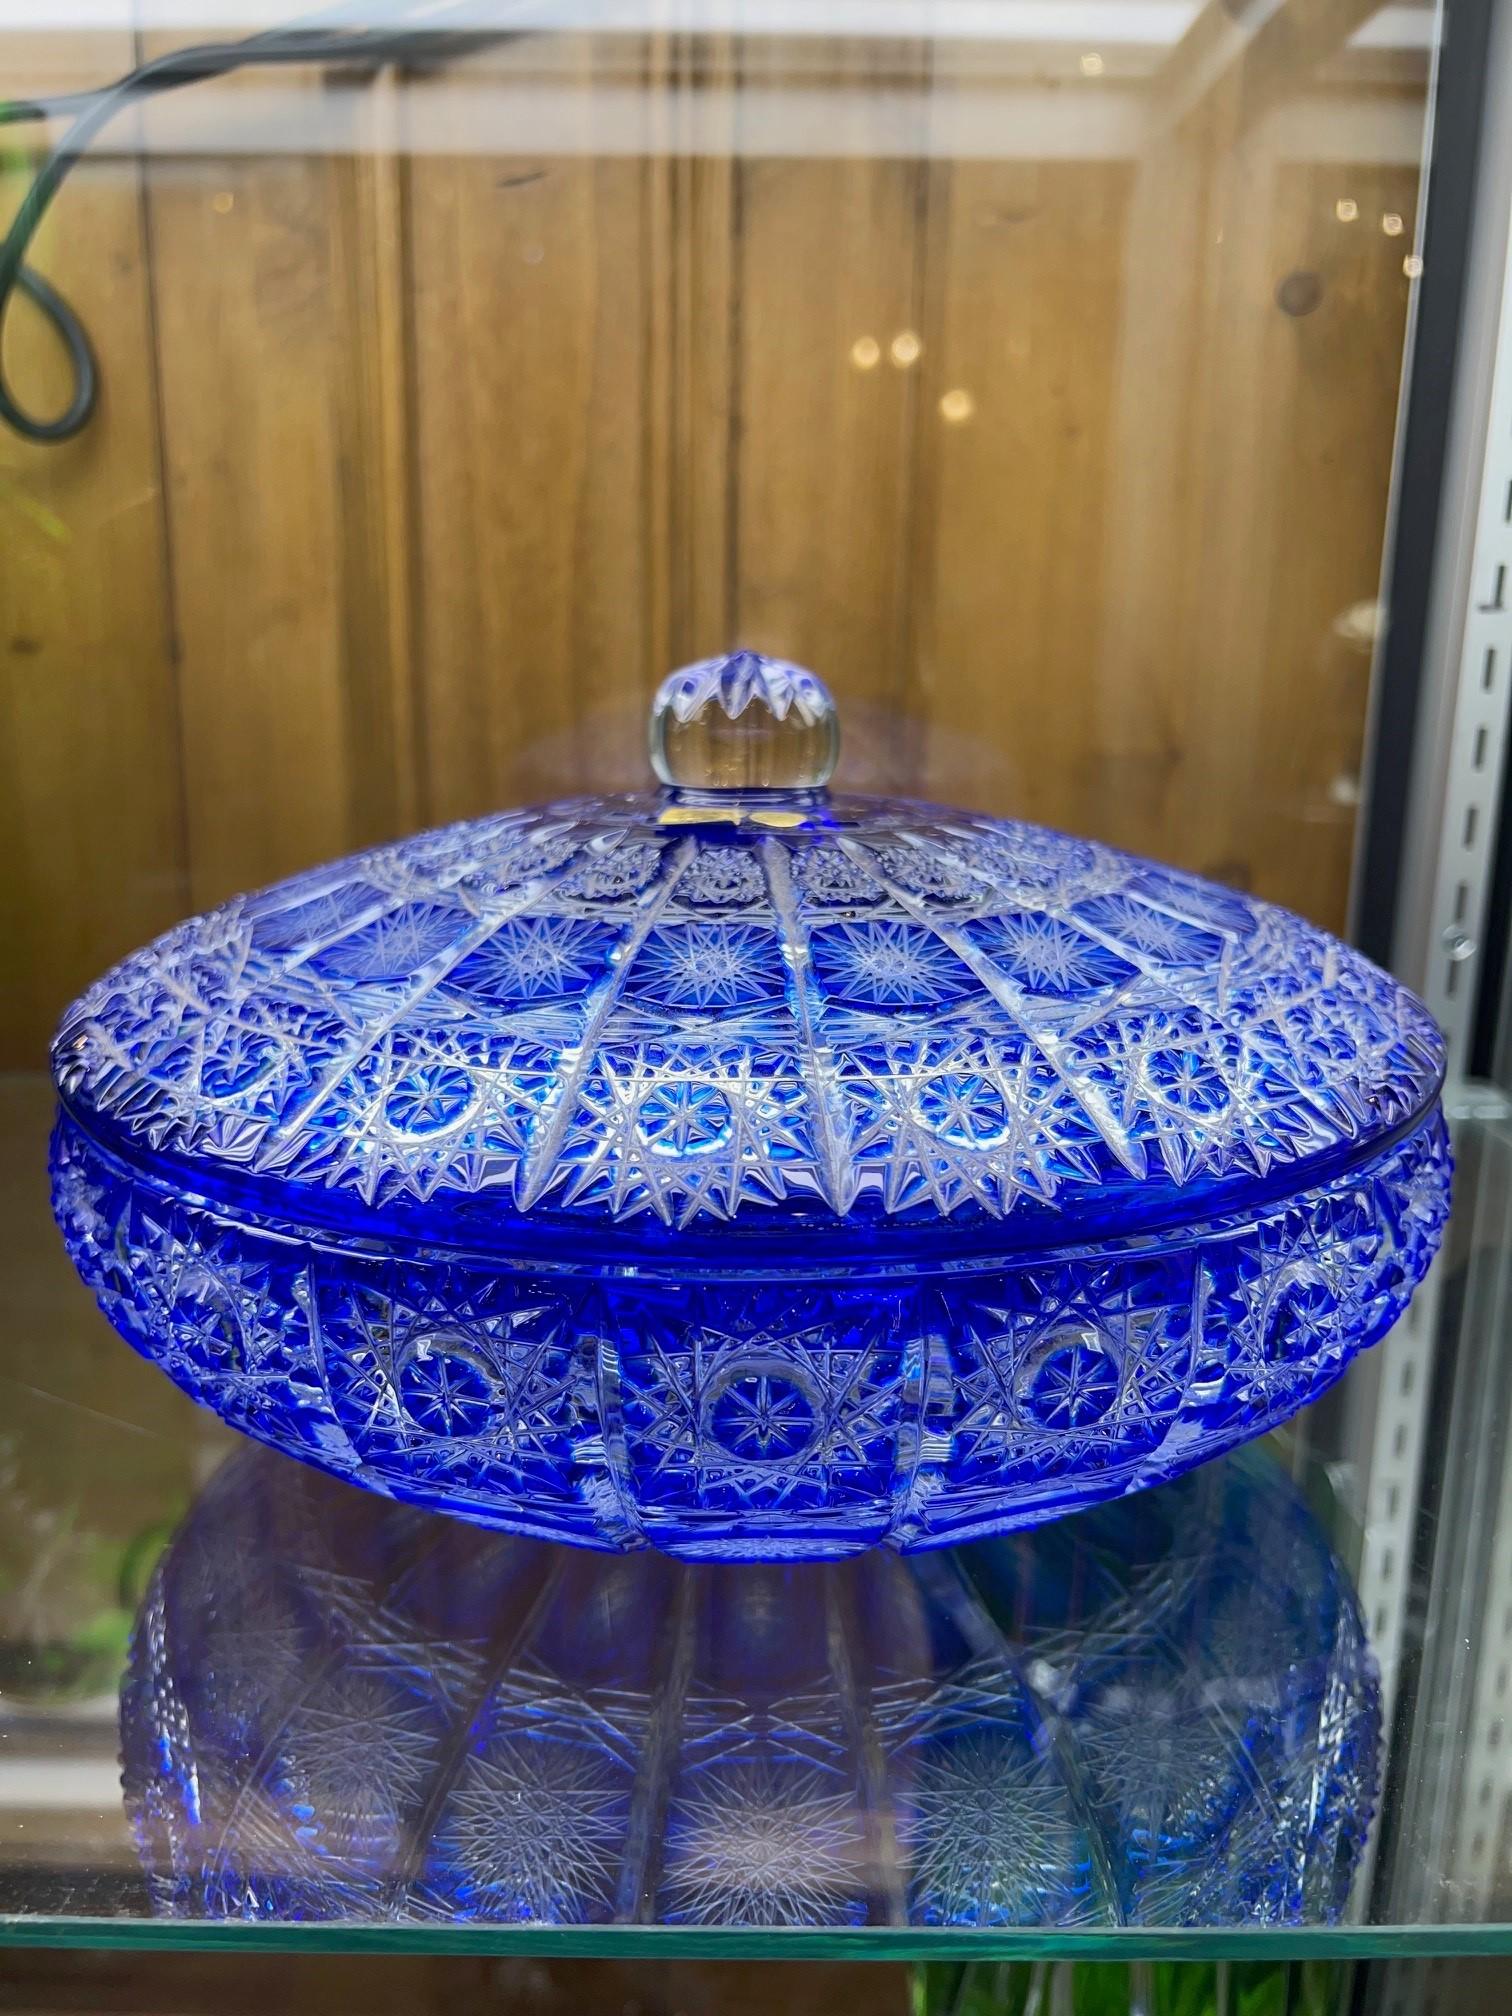 Stunning hand cut lead crystal candy dish with a cover created as a work of art by the hands of the finest Czech glass workers. The Caesar Crystal Company in the Czech Republic has been selling hand cut lead crystal pieces since 1861 and is known as